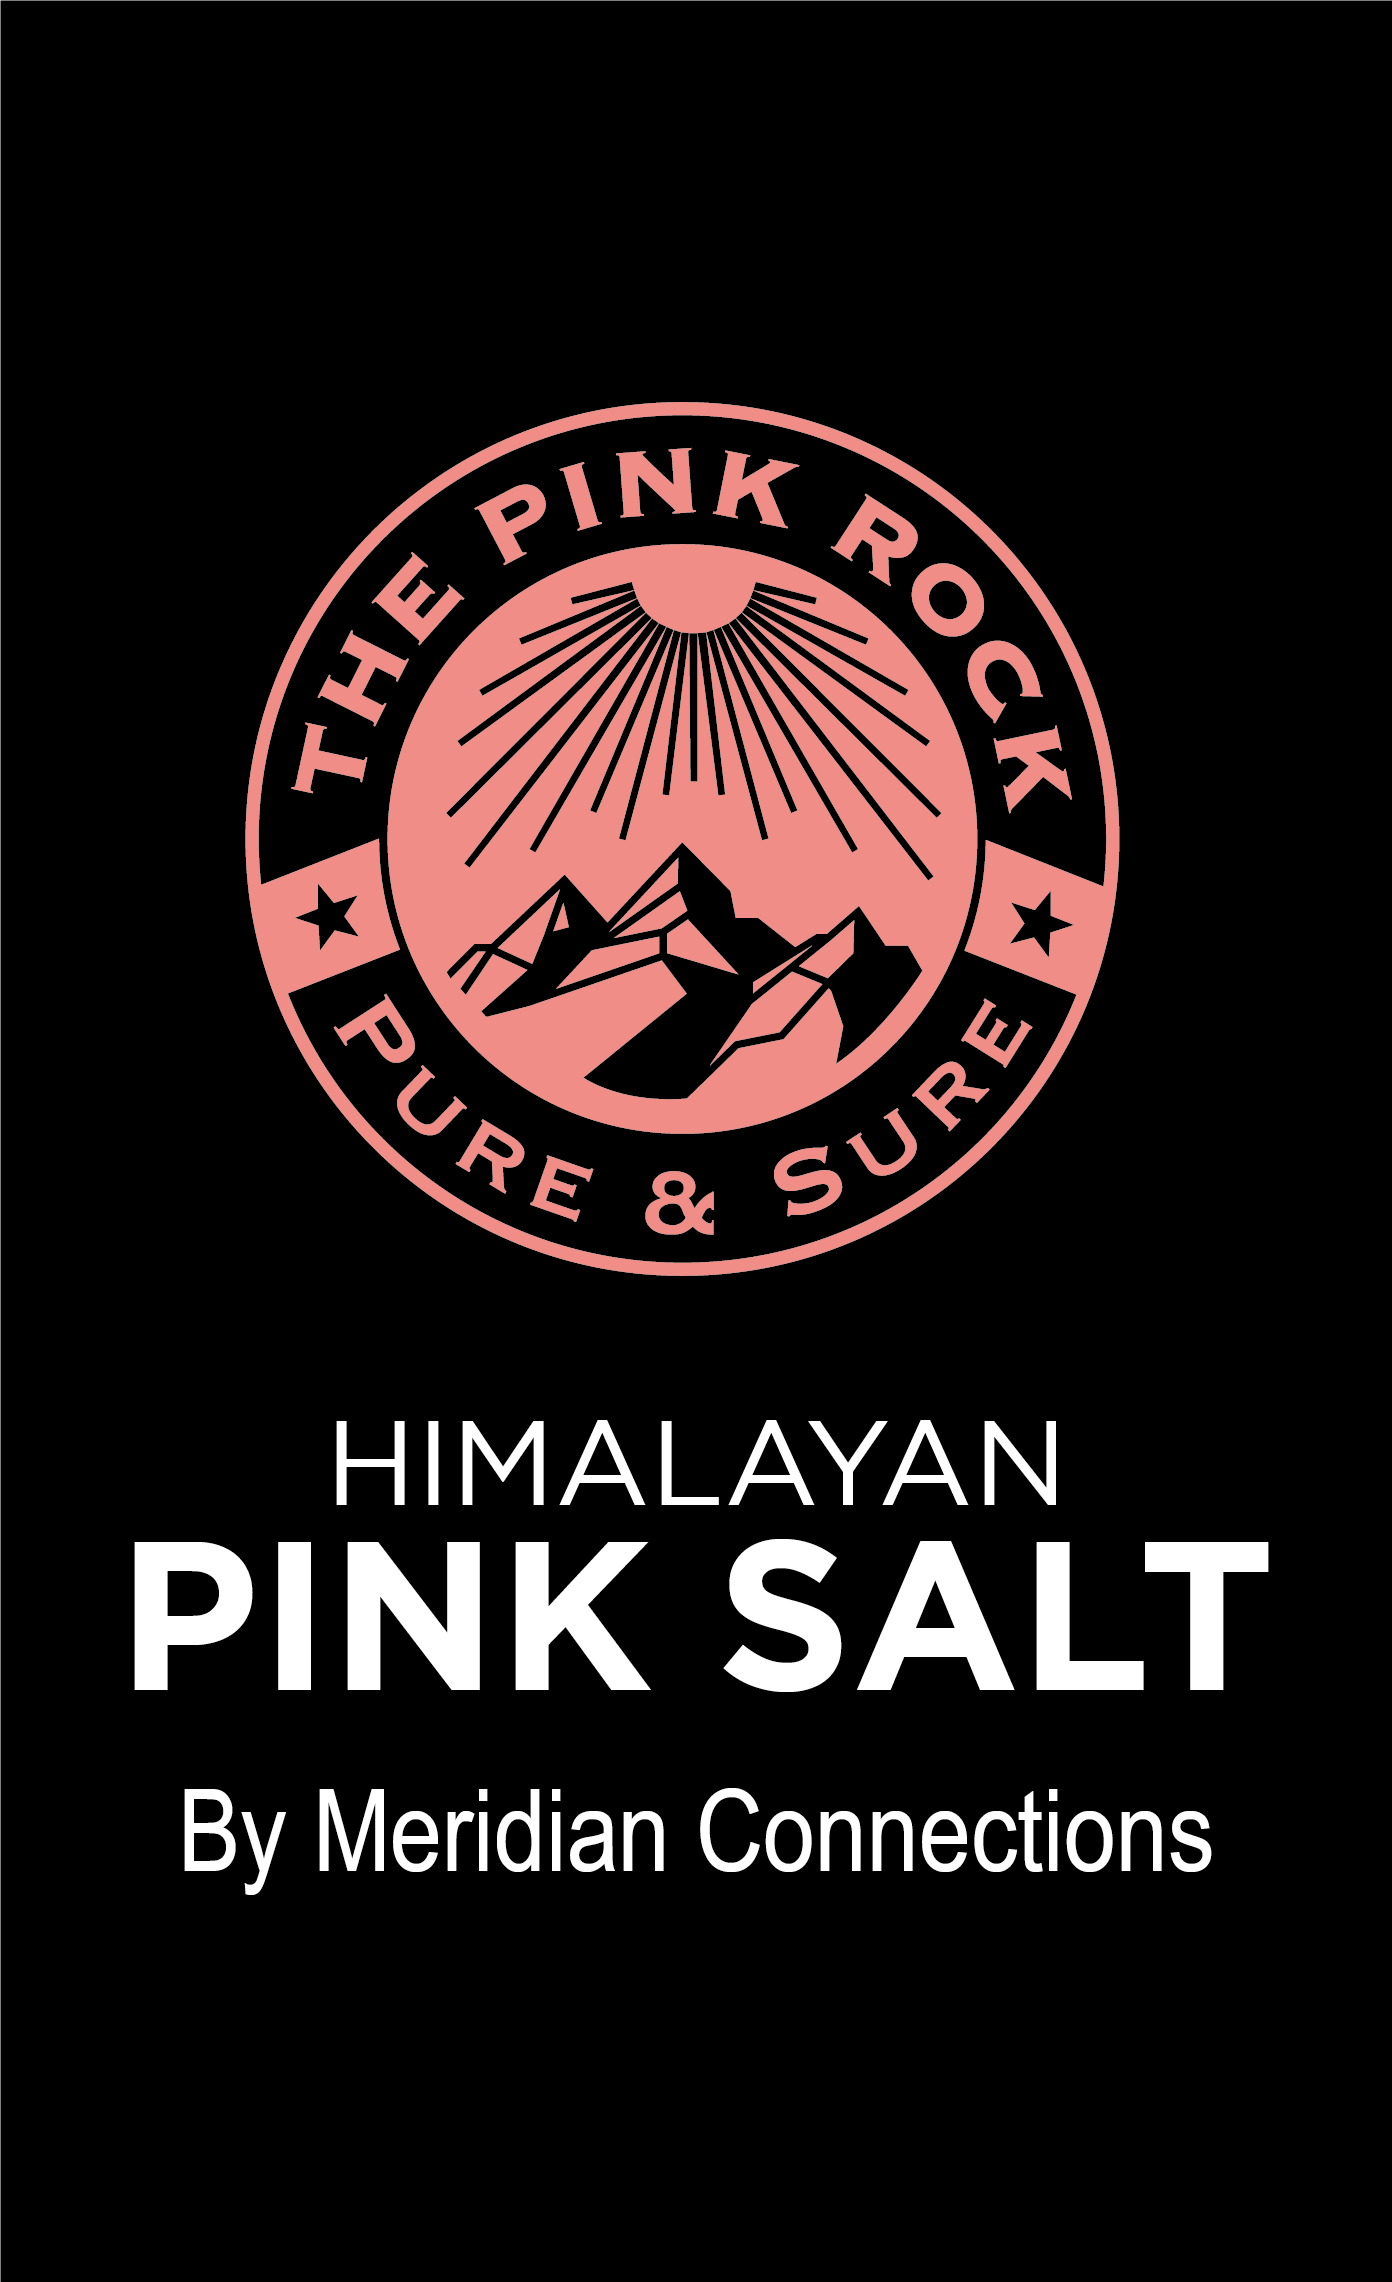 The Pink Rock; Himalayan Pink Salt by Meridian Connections